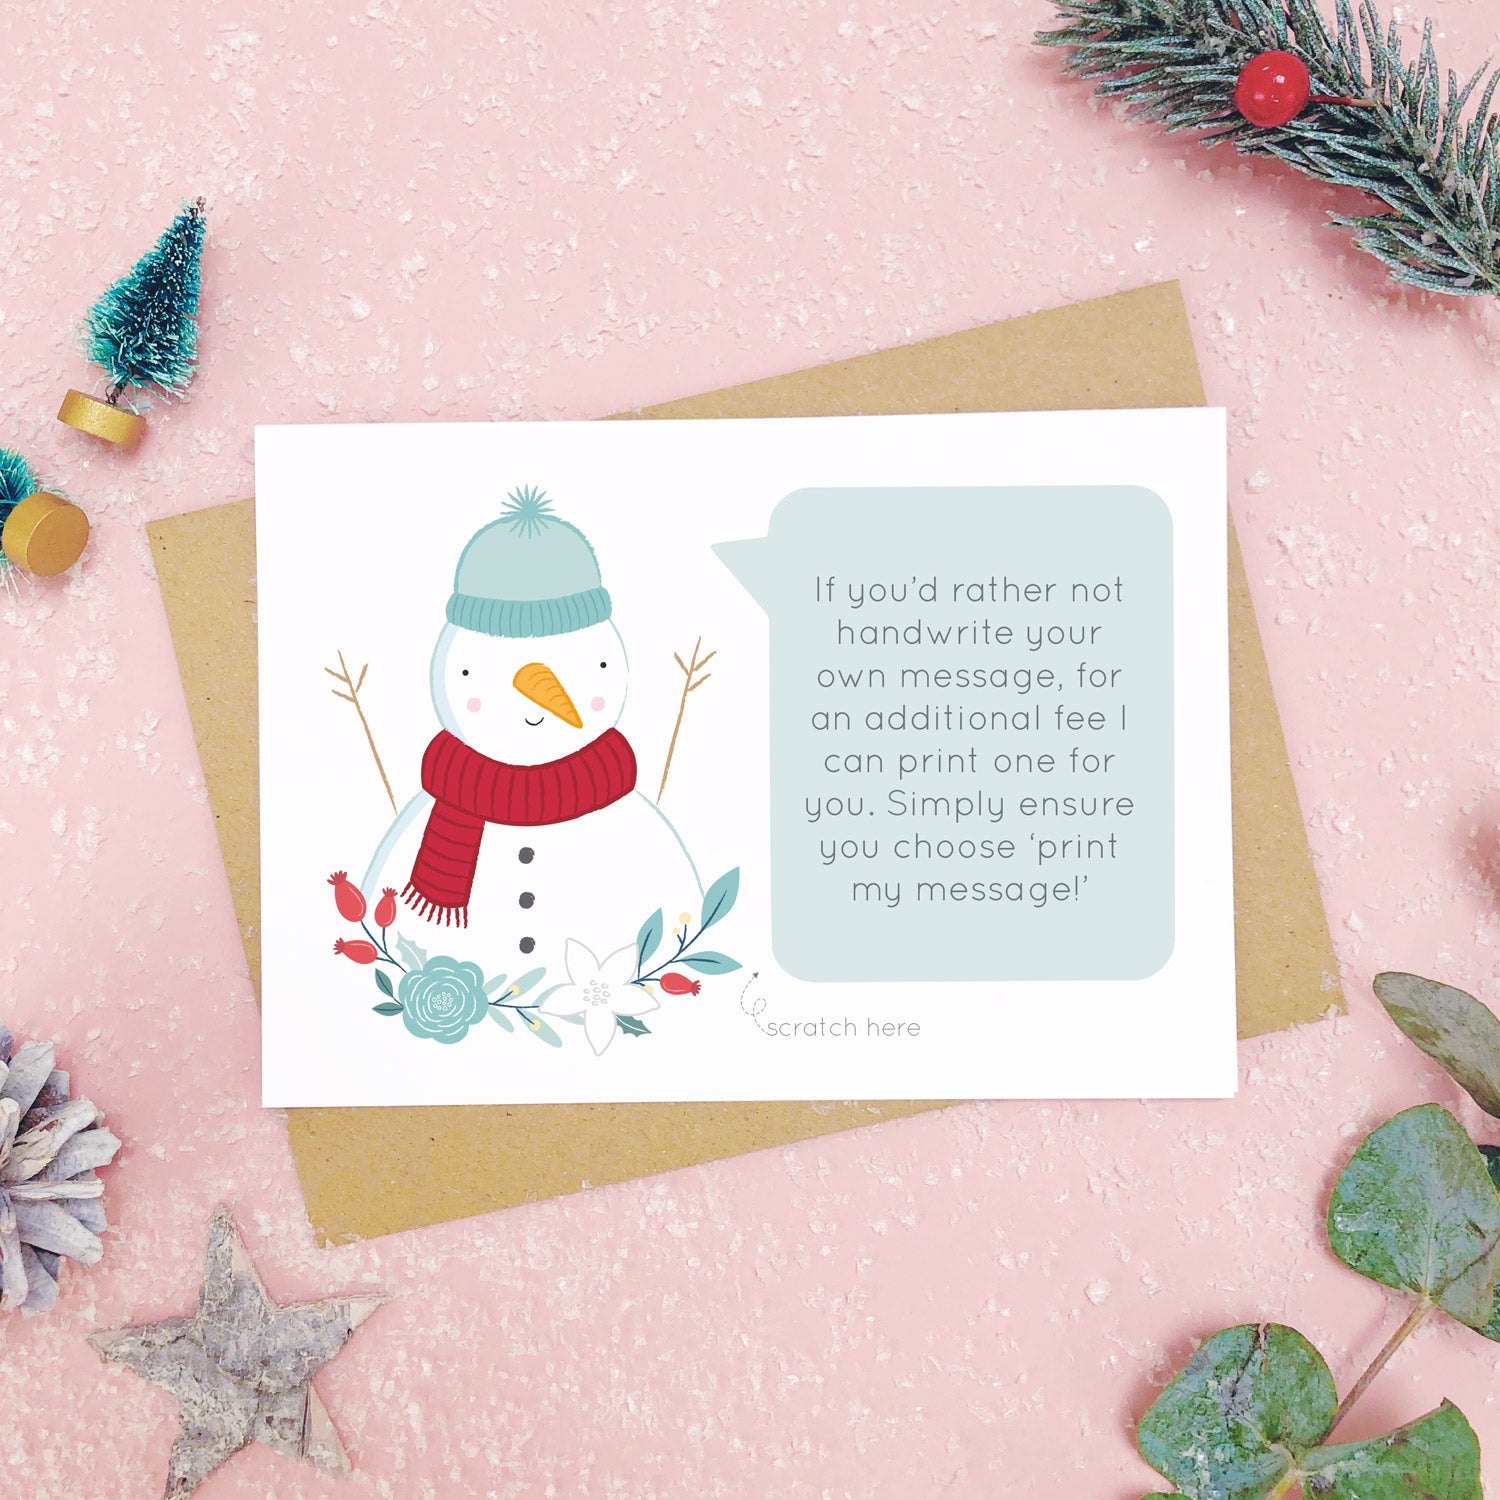 A personalised snowman scratch card an example of the printed message. Shot on a pink background with grey and green festive props.